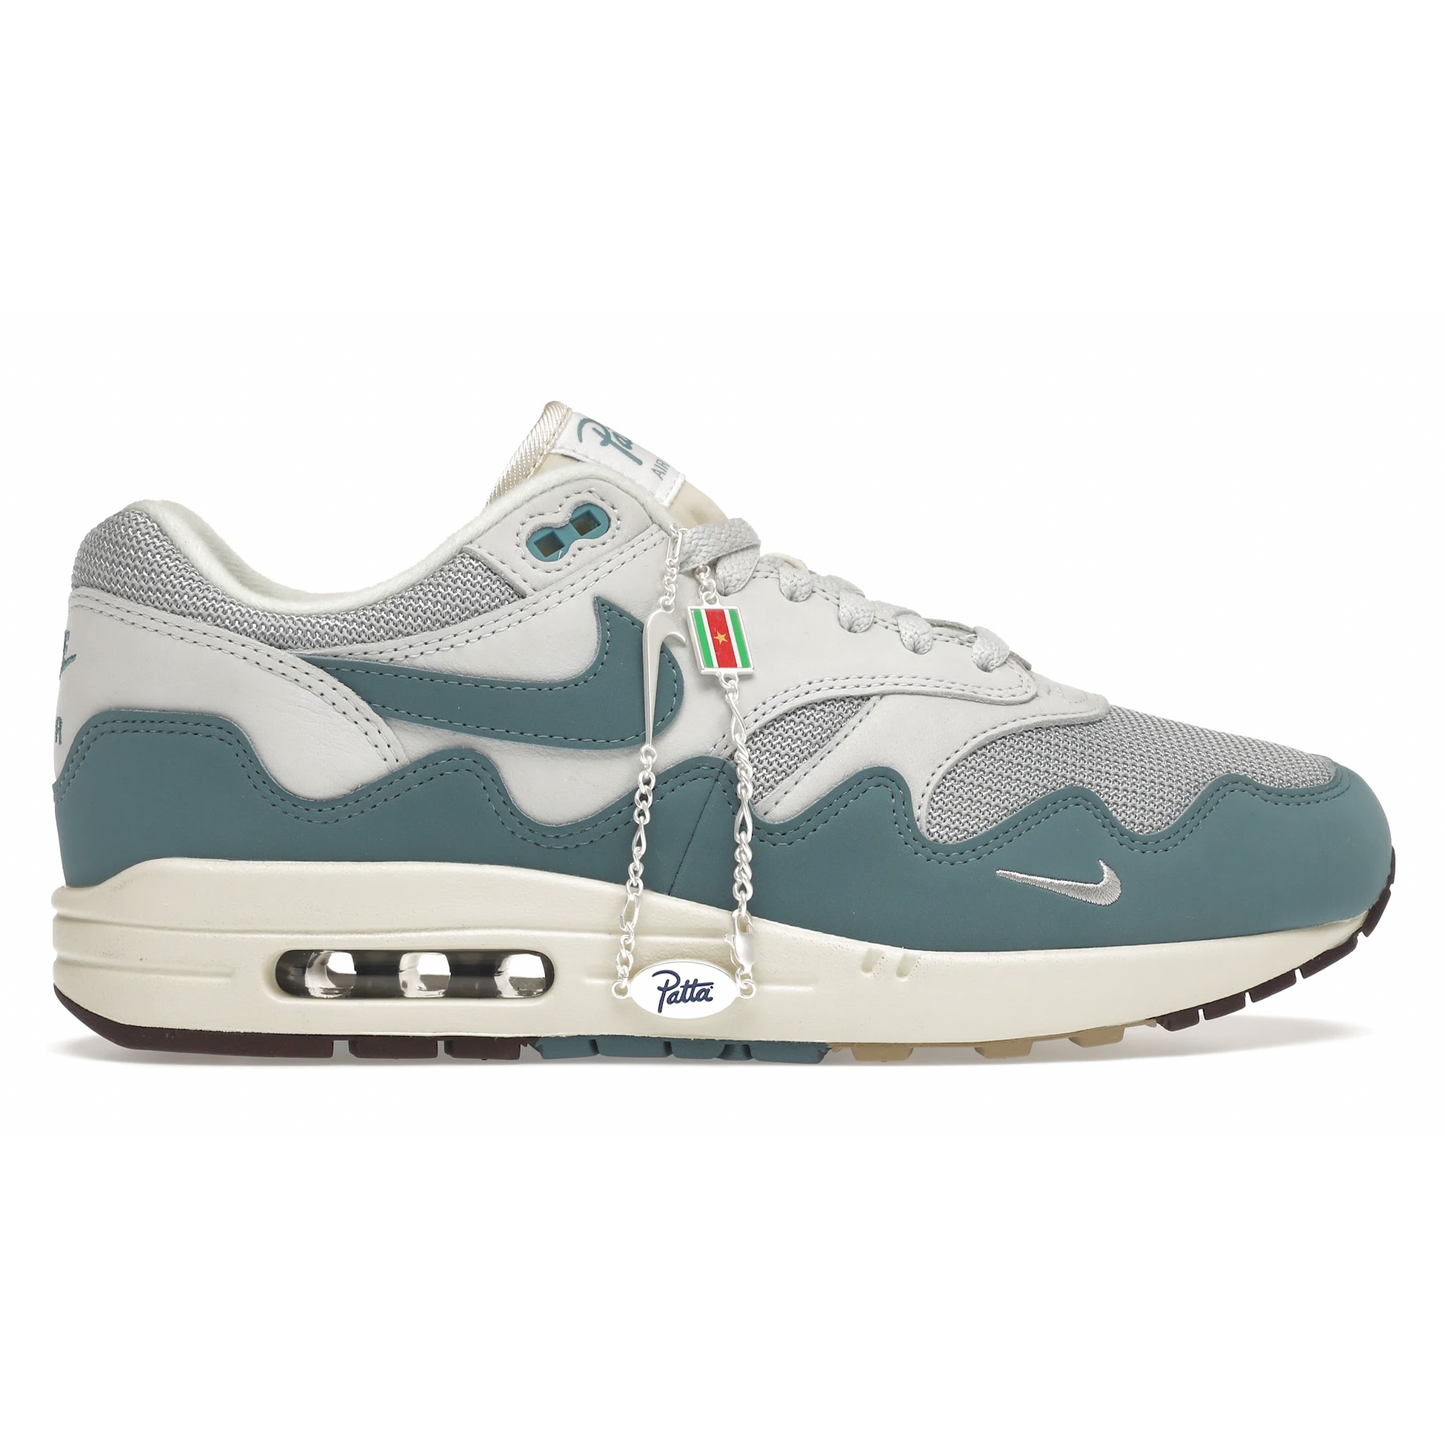 Nike Air Max 1 Patta Waves Noise Aqua (with bracelet) from Nike